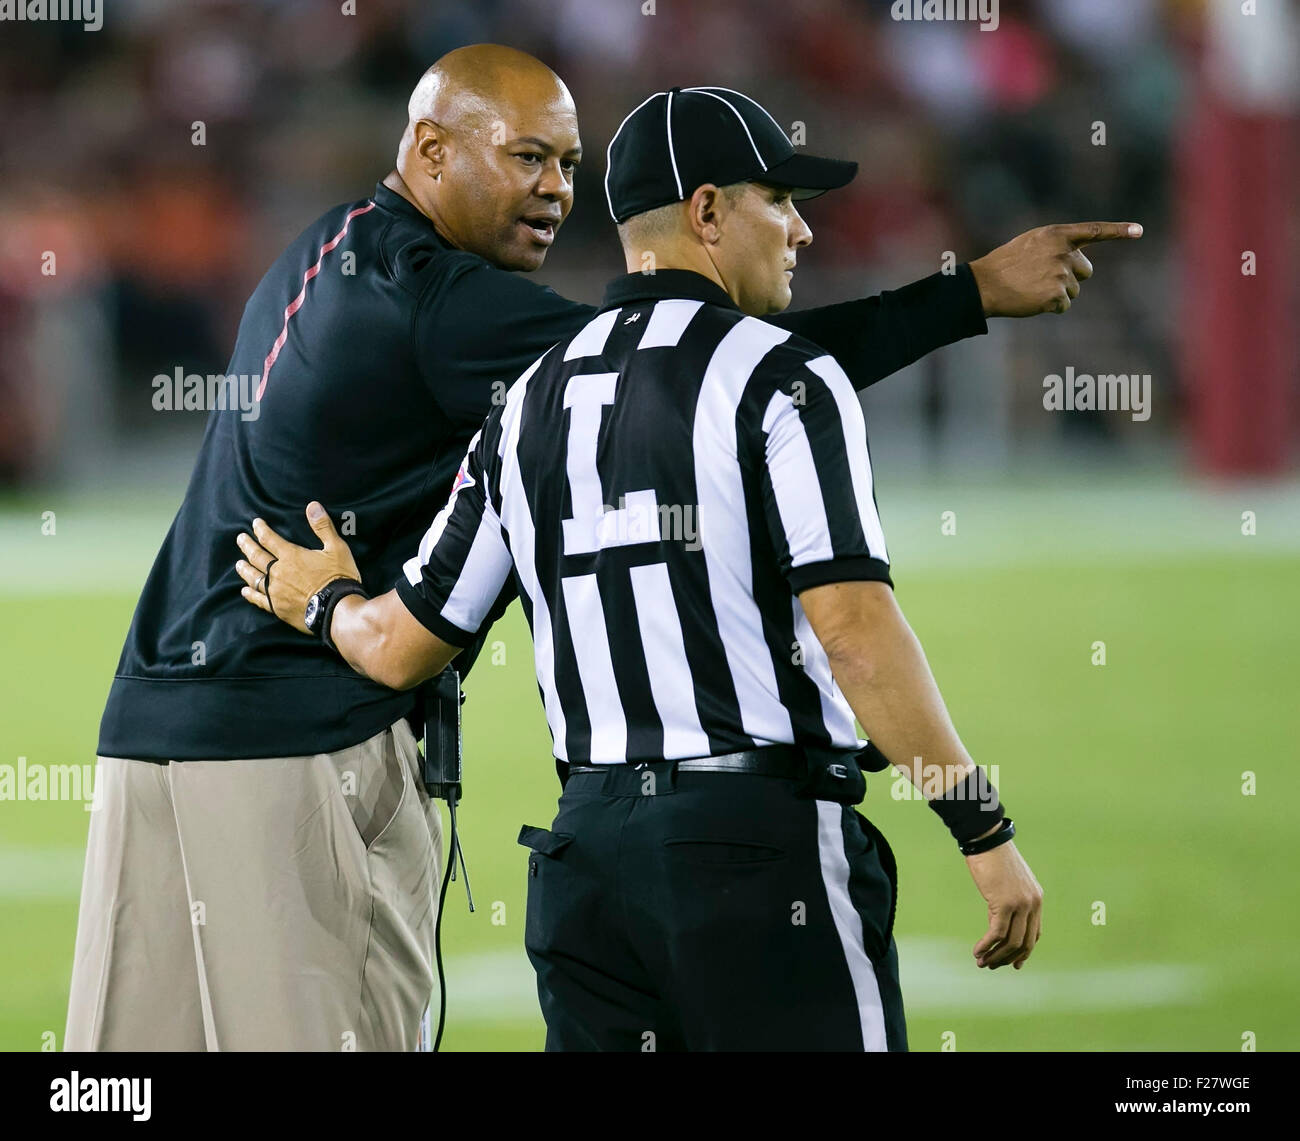 Palo Alto, CA. 12th Sep, 2015. Stanford Cardinal head coach David Shaw confers with an official during the NCAA Football game between the Stanford Cardinal and the UCF Knights at Stanford Stadium in Palo Alto, CA. Stanford defeated UCF 31-7. Damon Tarver/Cal Sport Media/Alamy Live News Stock Photo